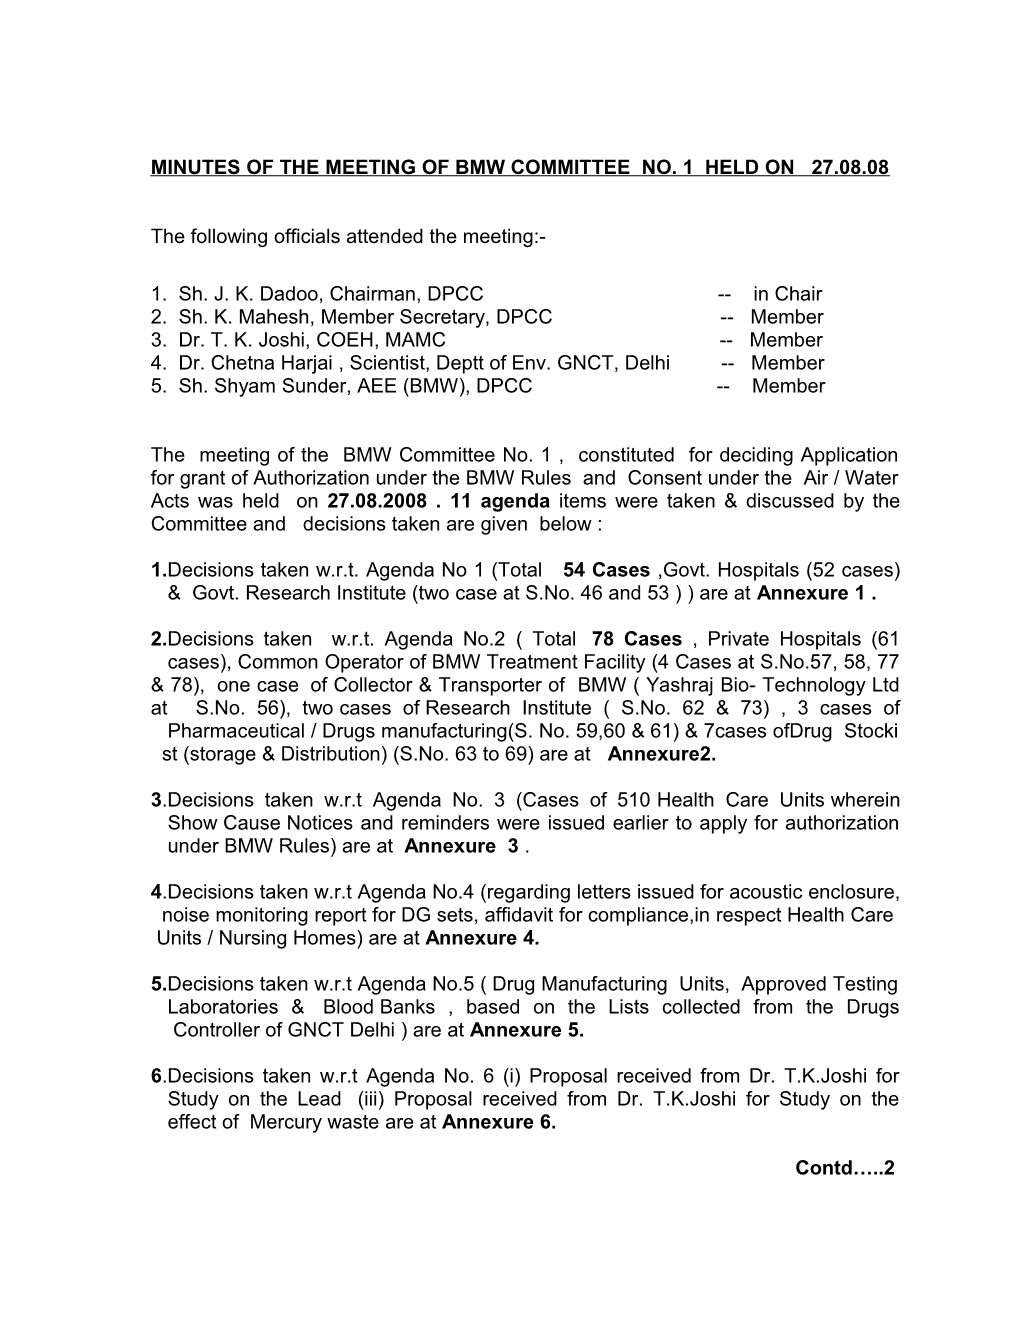 Minutes of the Meeting of Bmw Committee No. 1 Held on 27.08.08